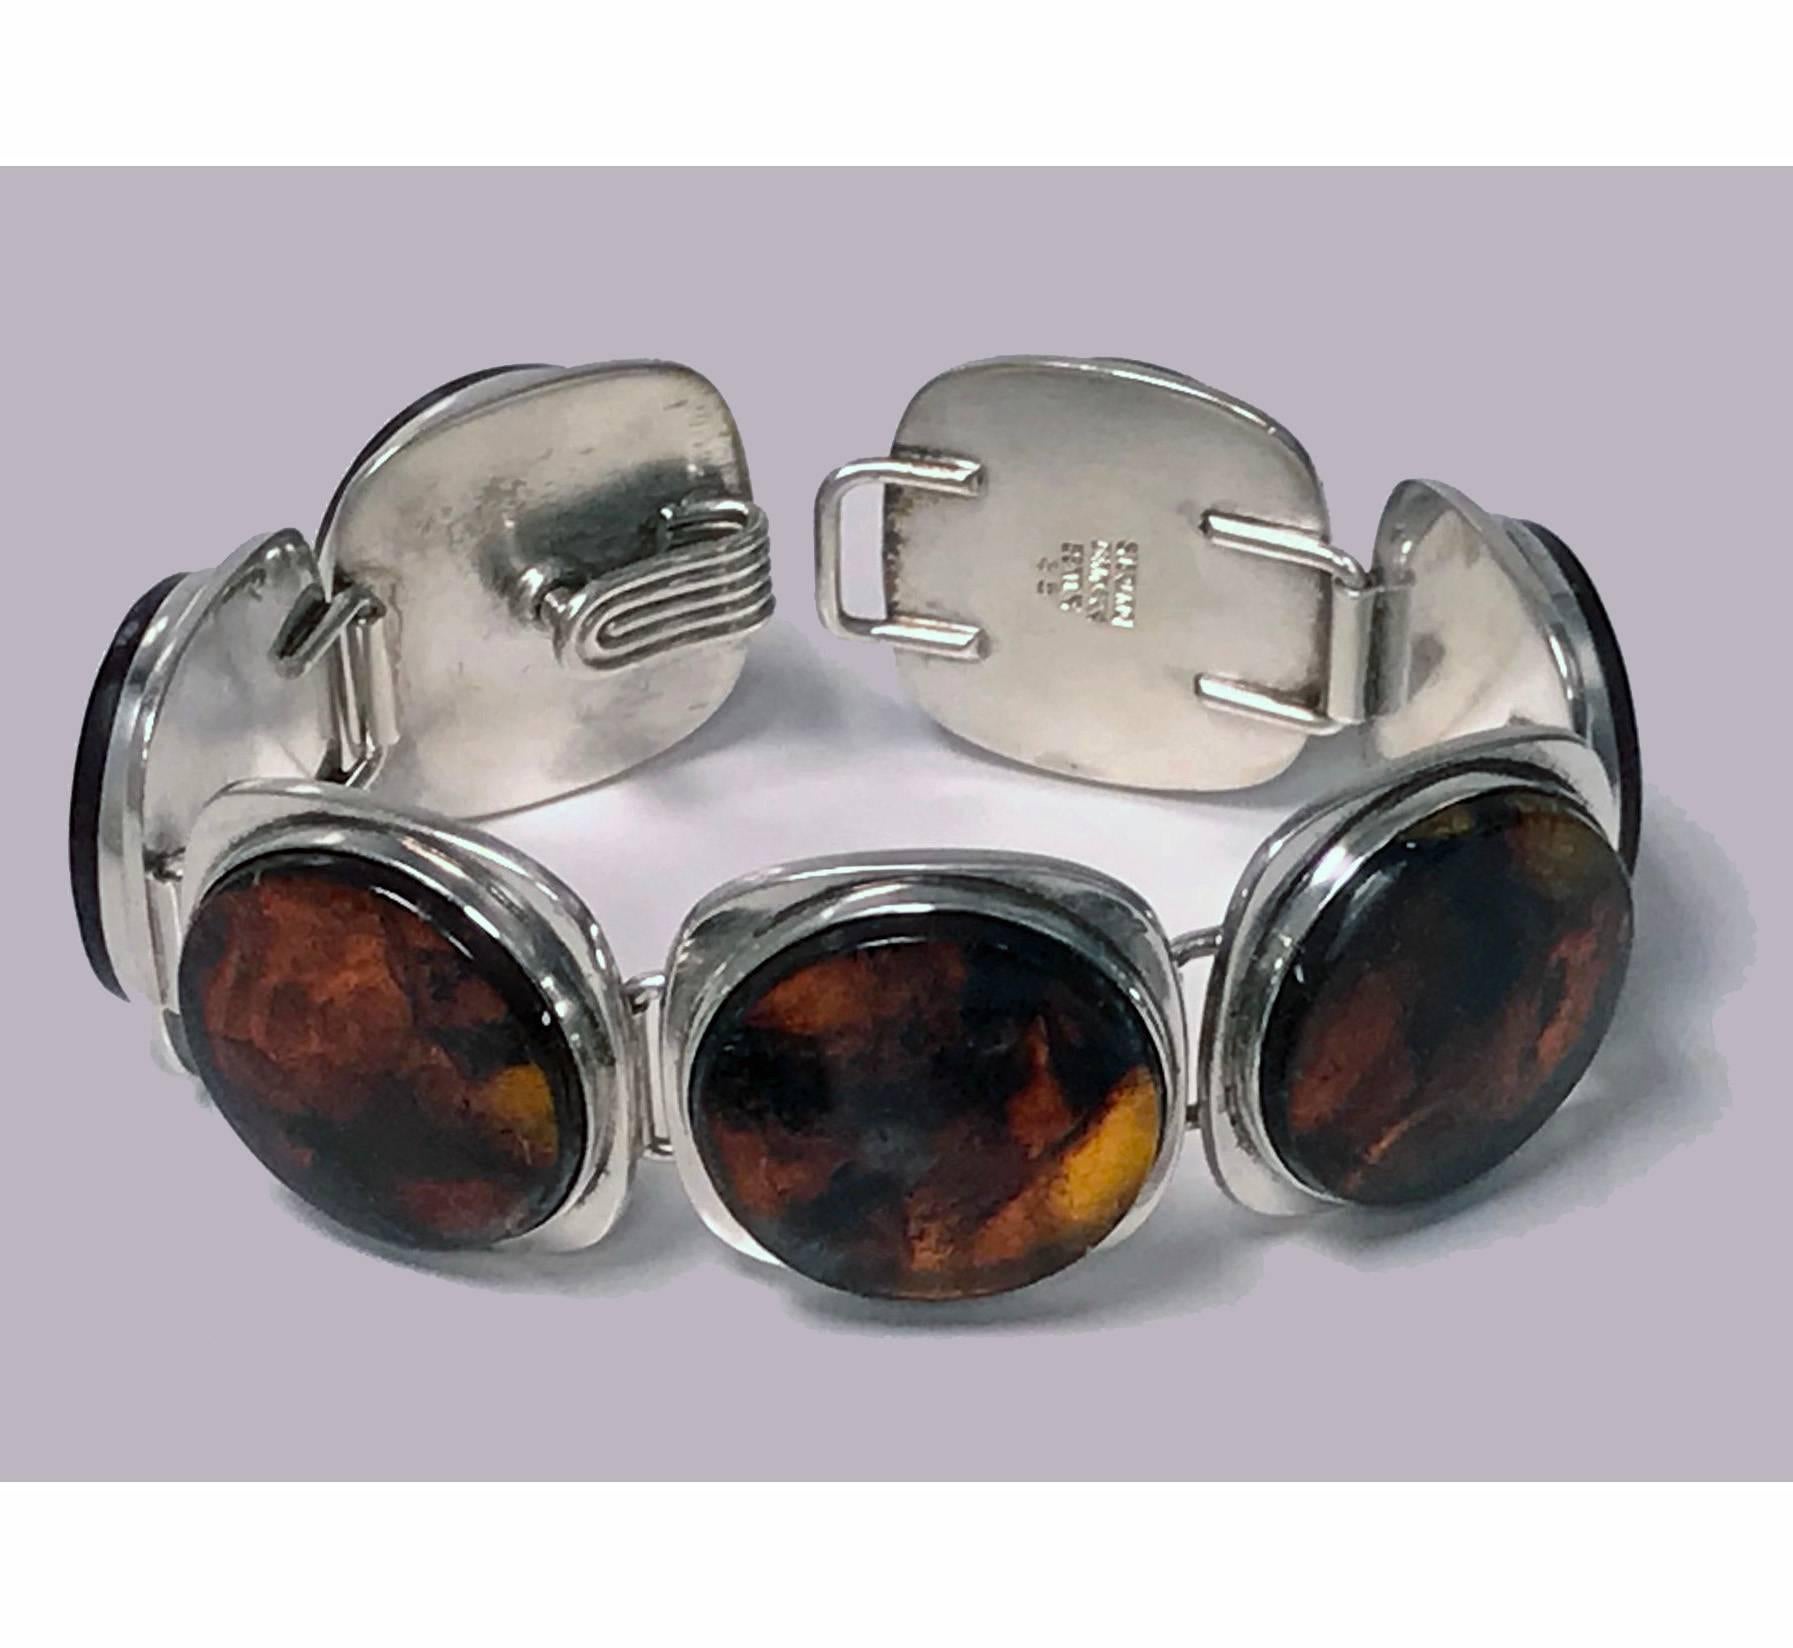 Danish mid-century Sterling Amber Bracelet and matching Earrings, Bent Knudsen C.1957. The bracelet comprising seven large round bezel set large amber stones, the end section with rotating mechanism to conform as clasp with hook fitment; together